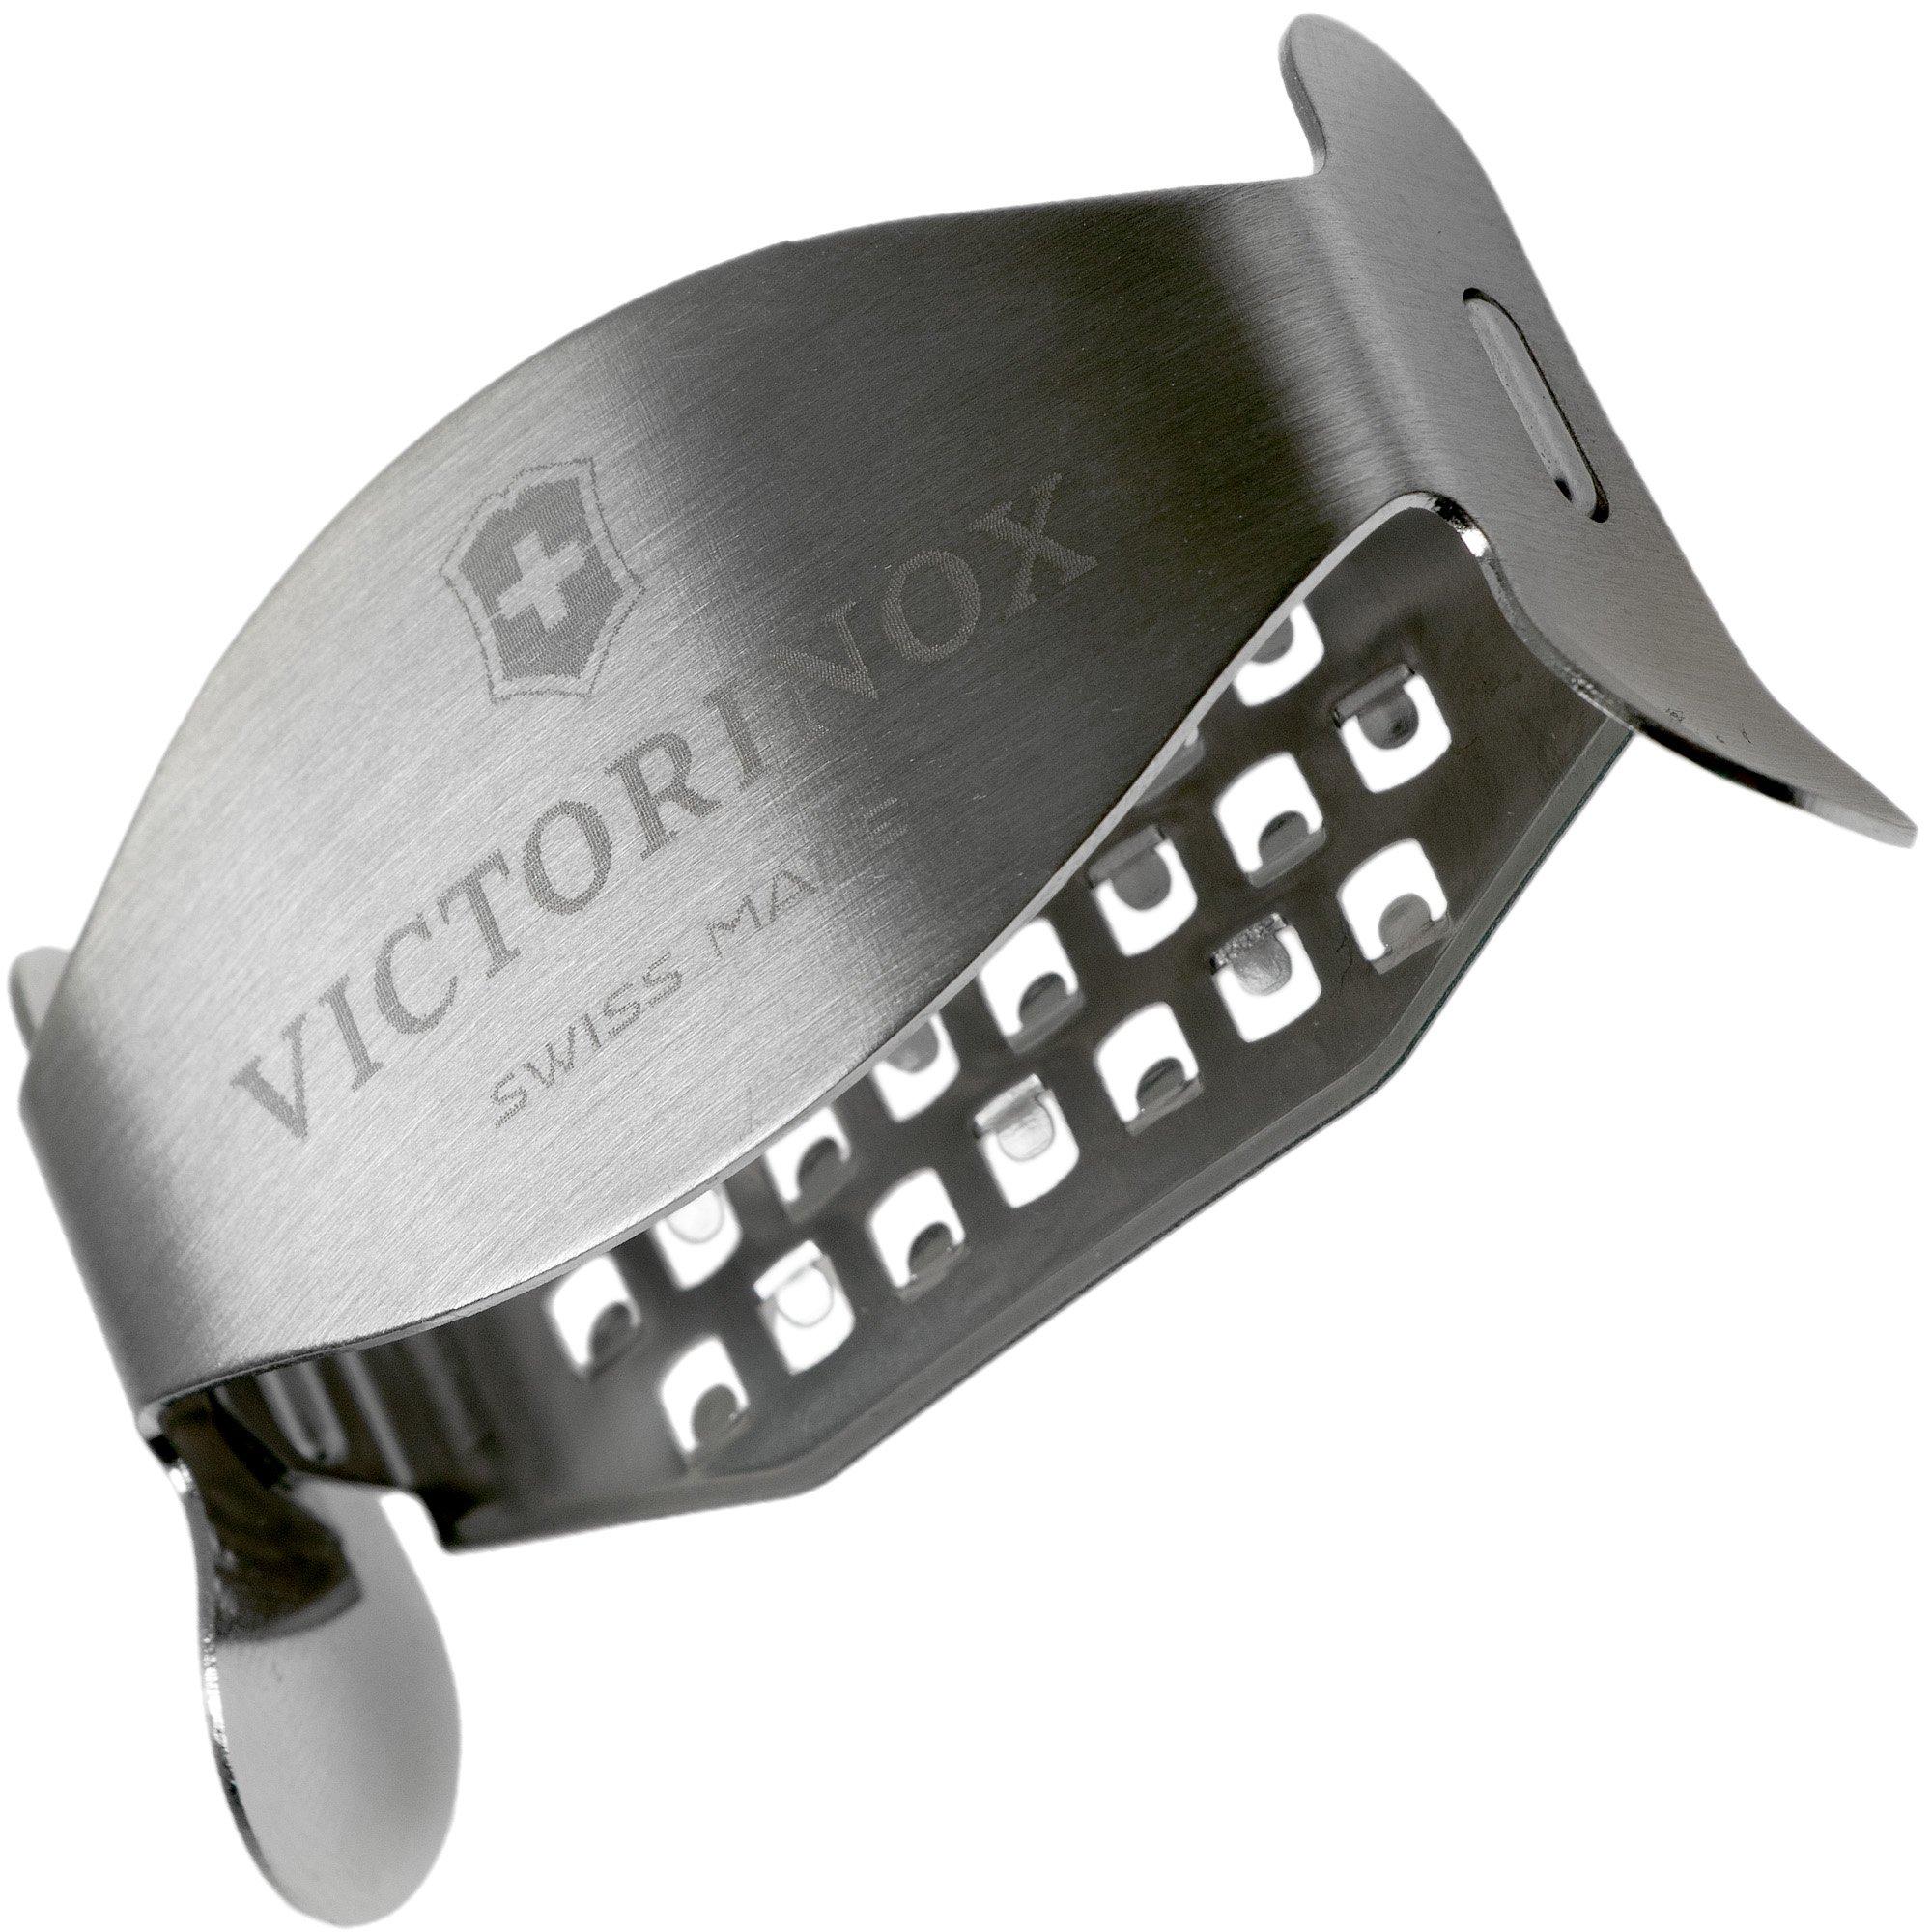 Victorinox cheese grater fine, 7.6076  Advantageously shopping at